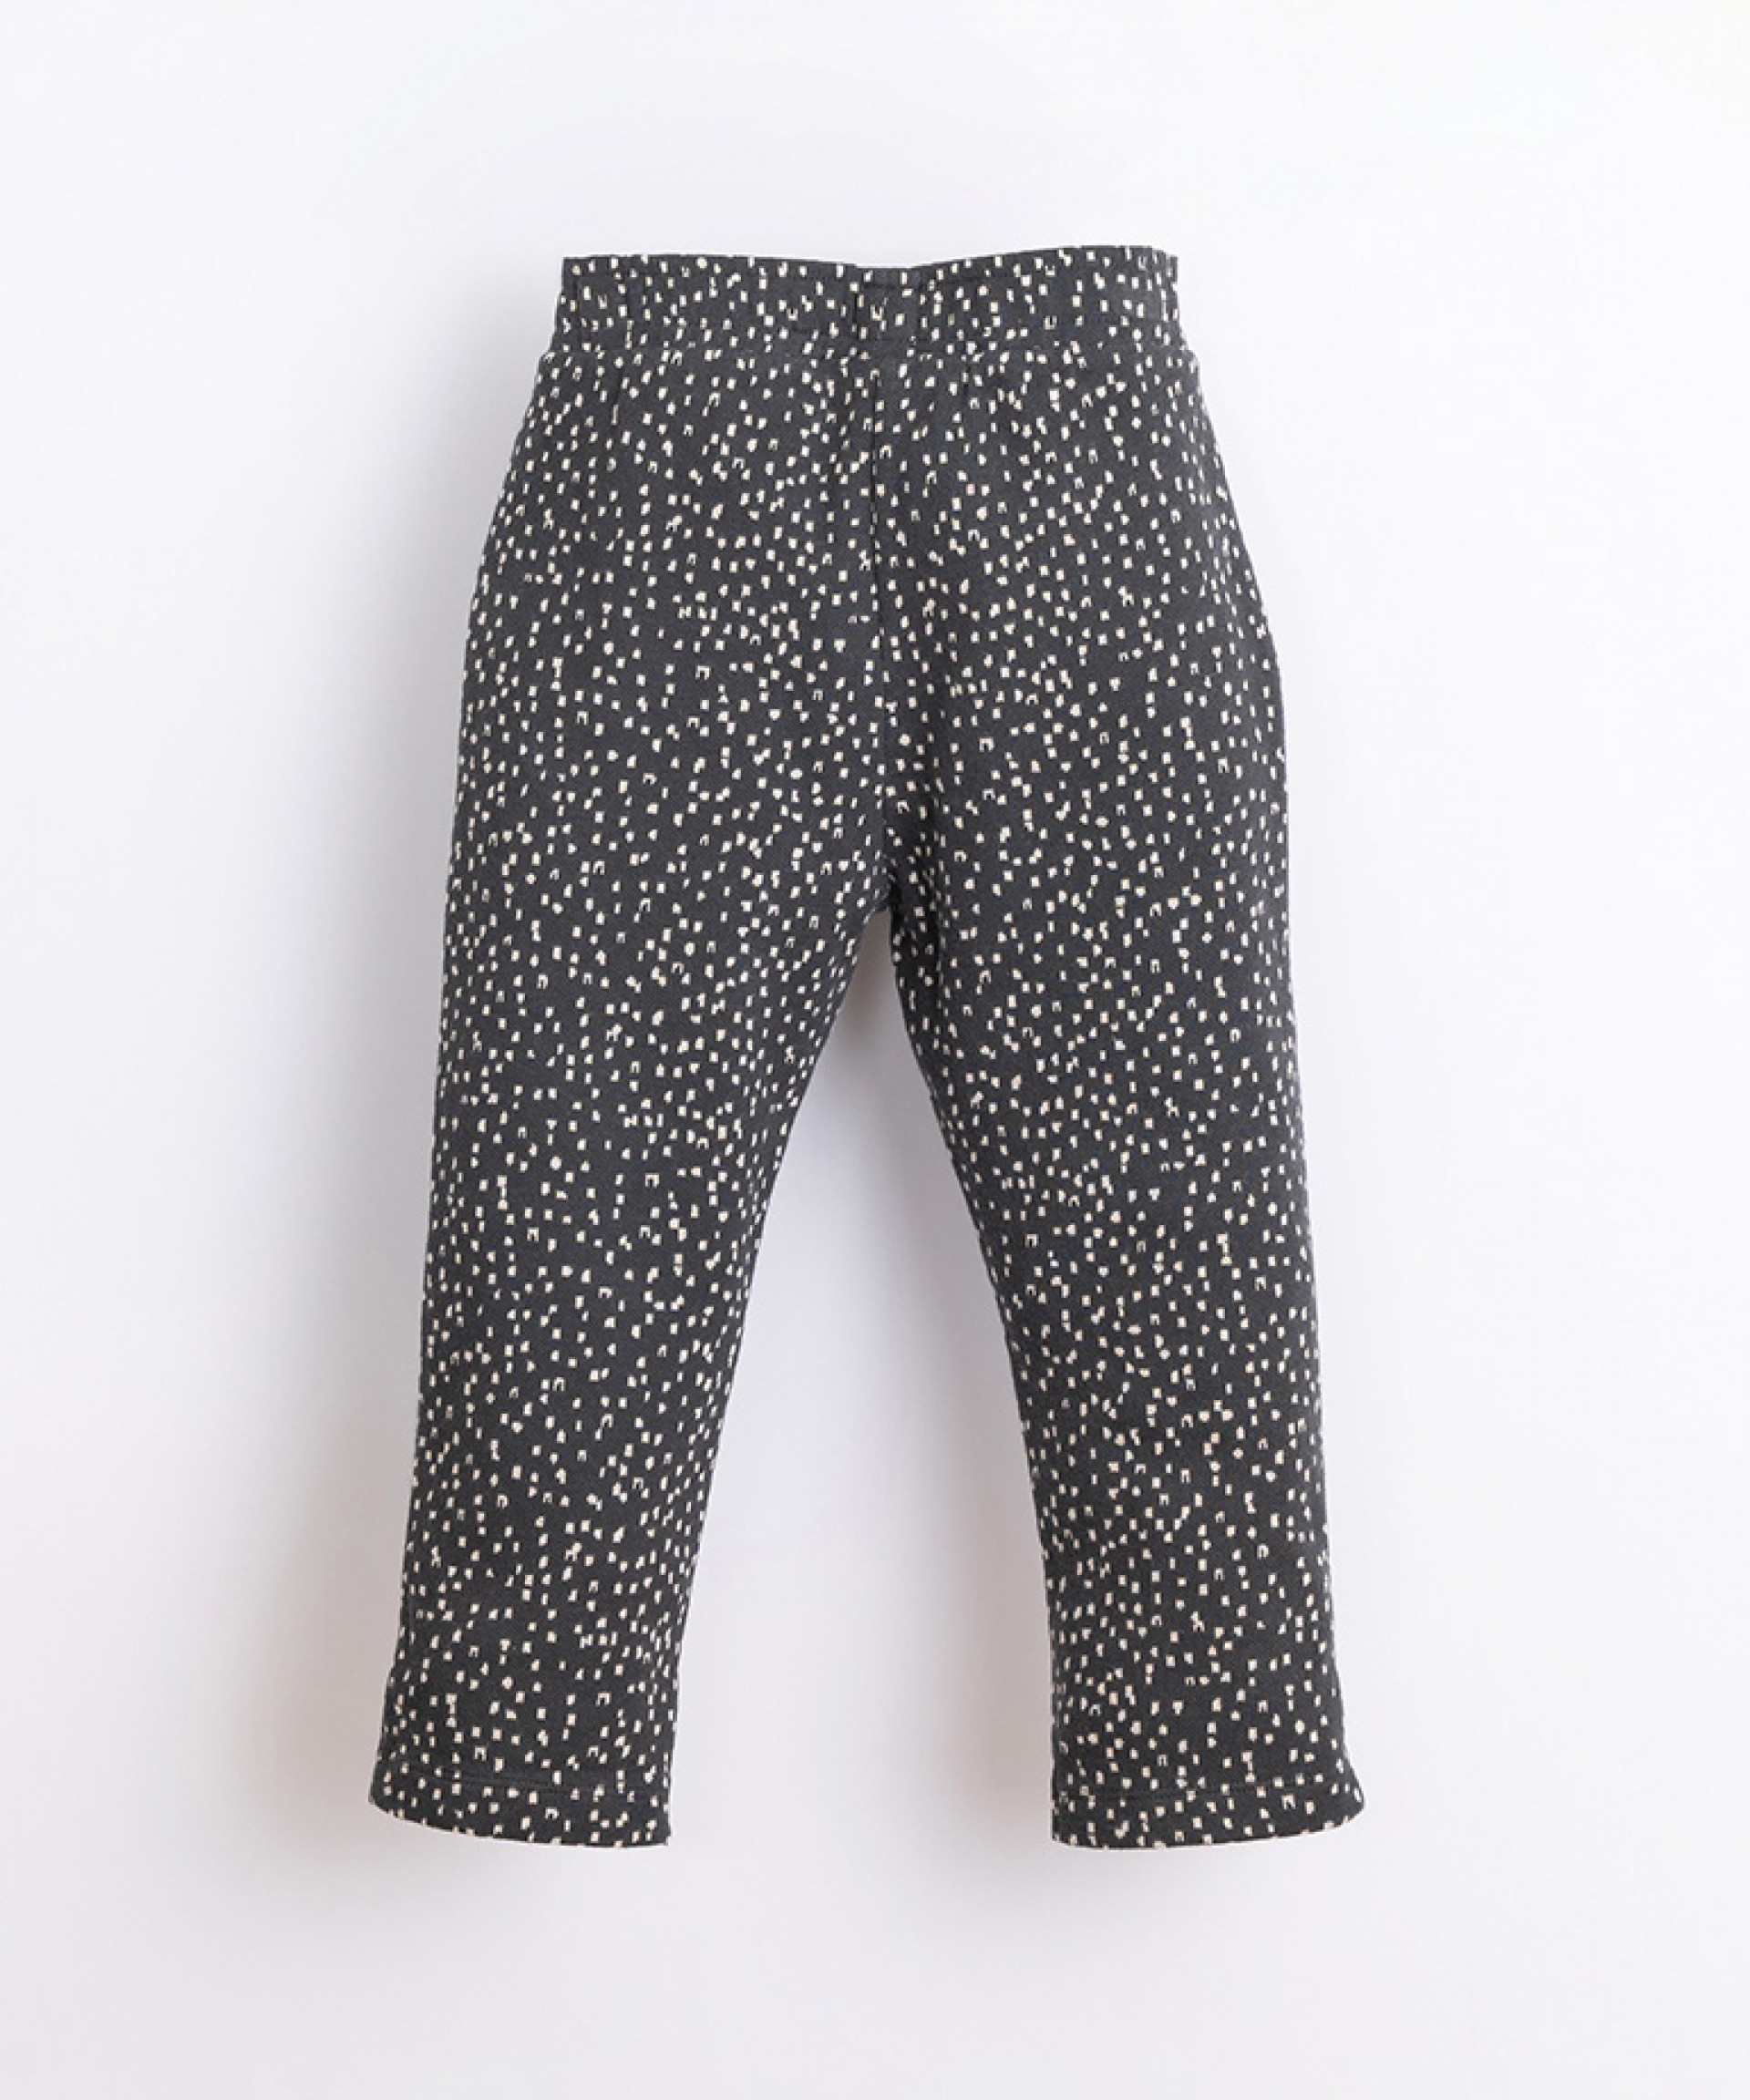 Organic cotton trousers with a pattern | Illustration